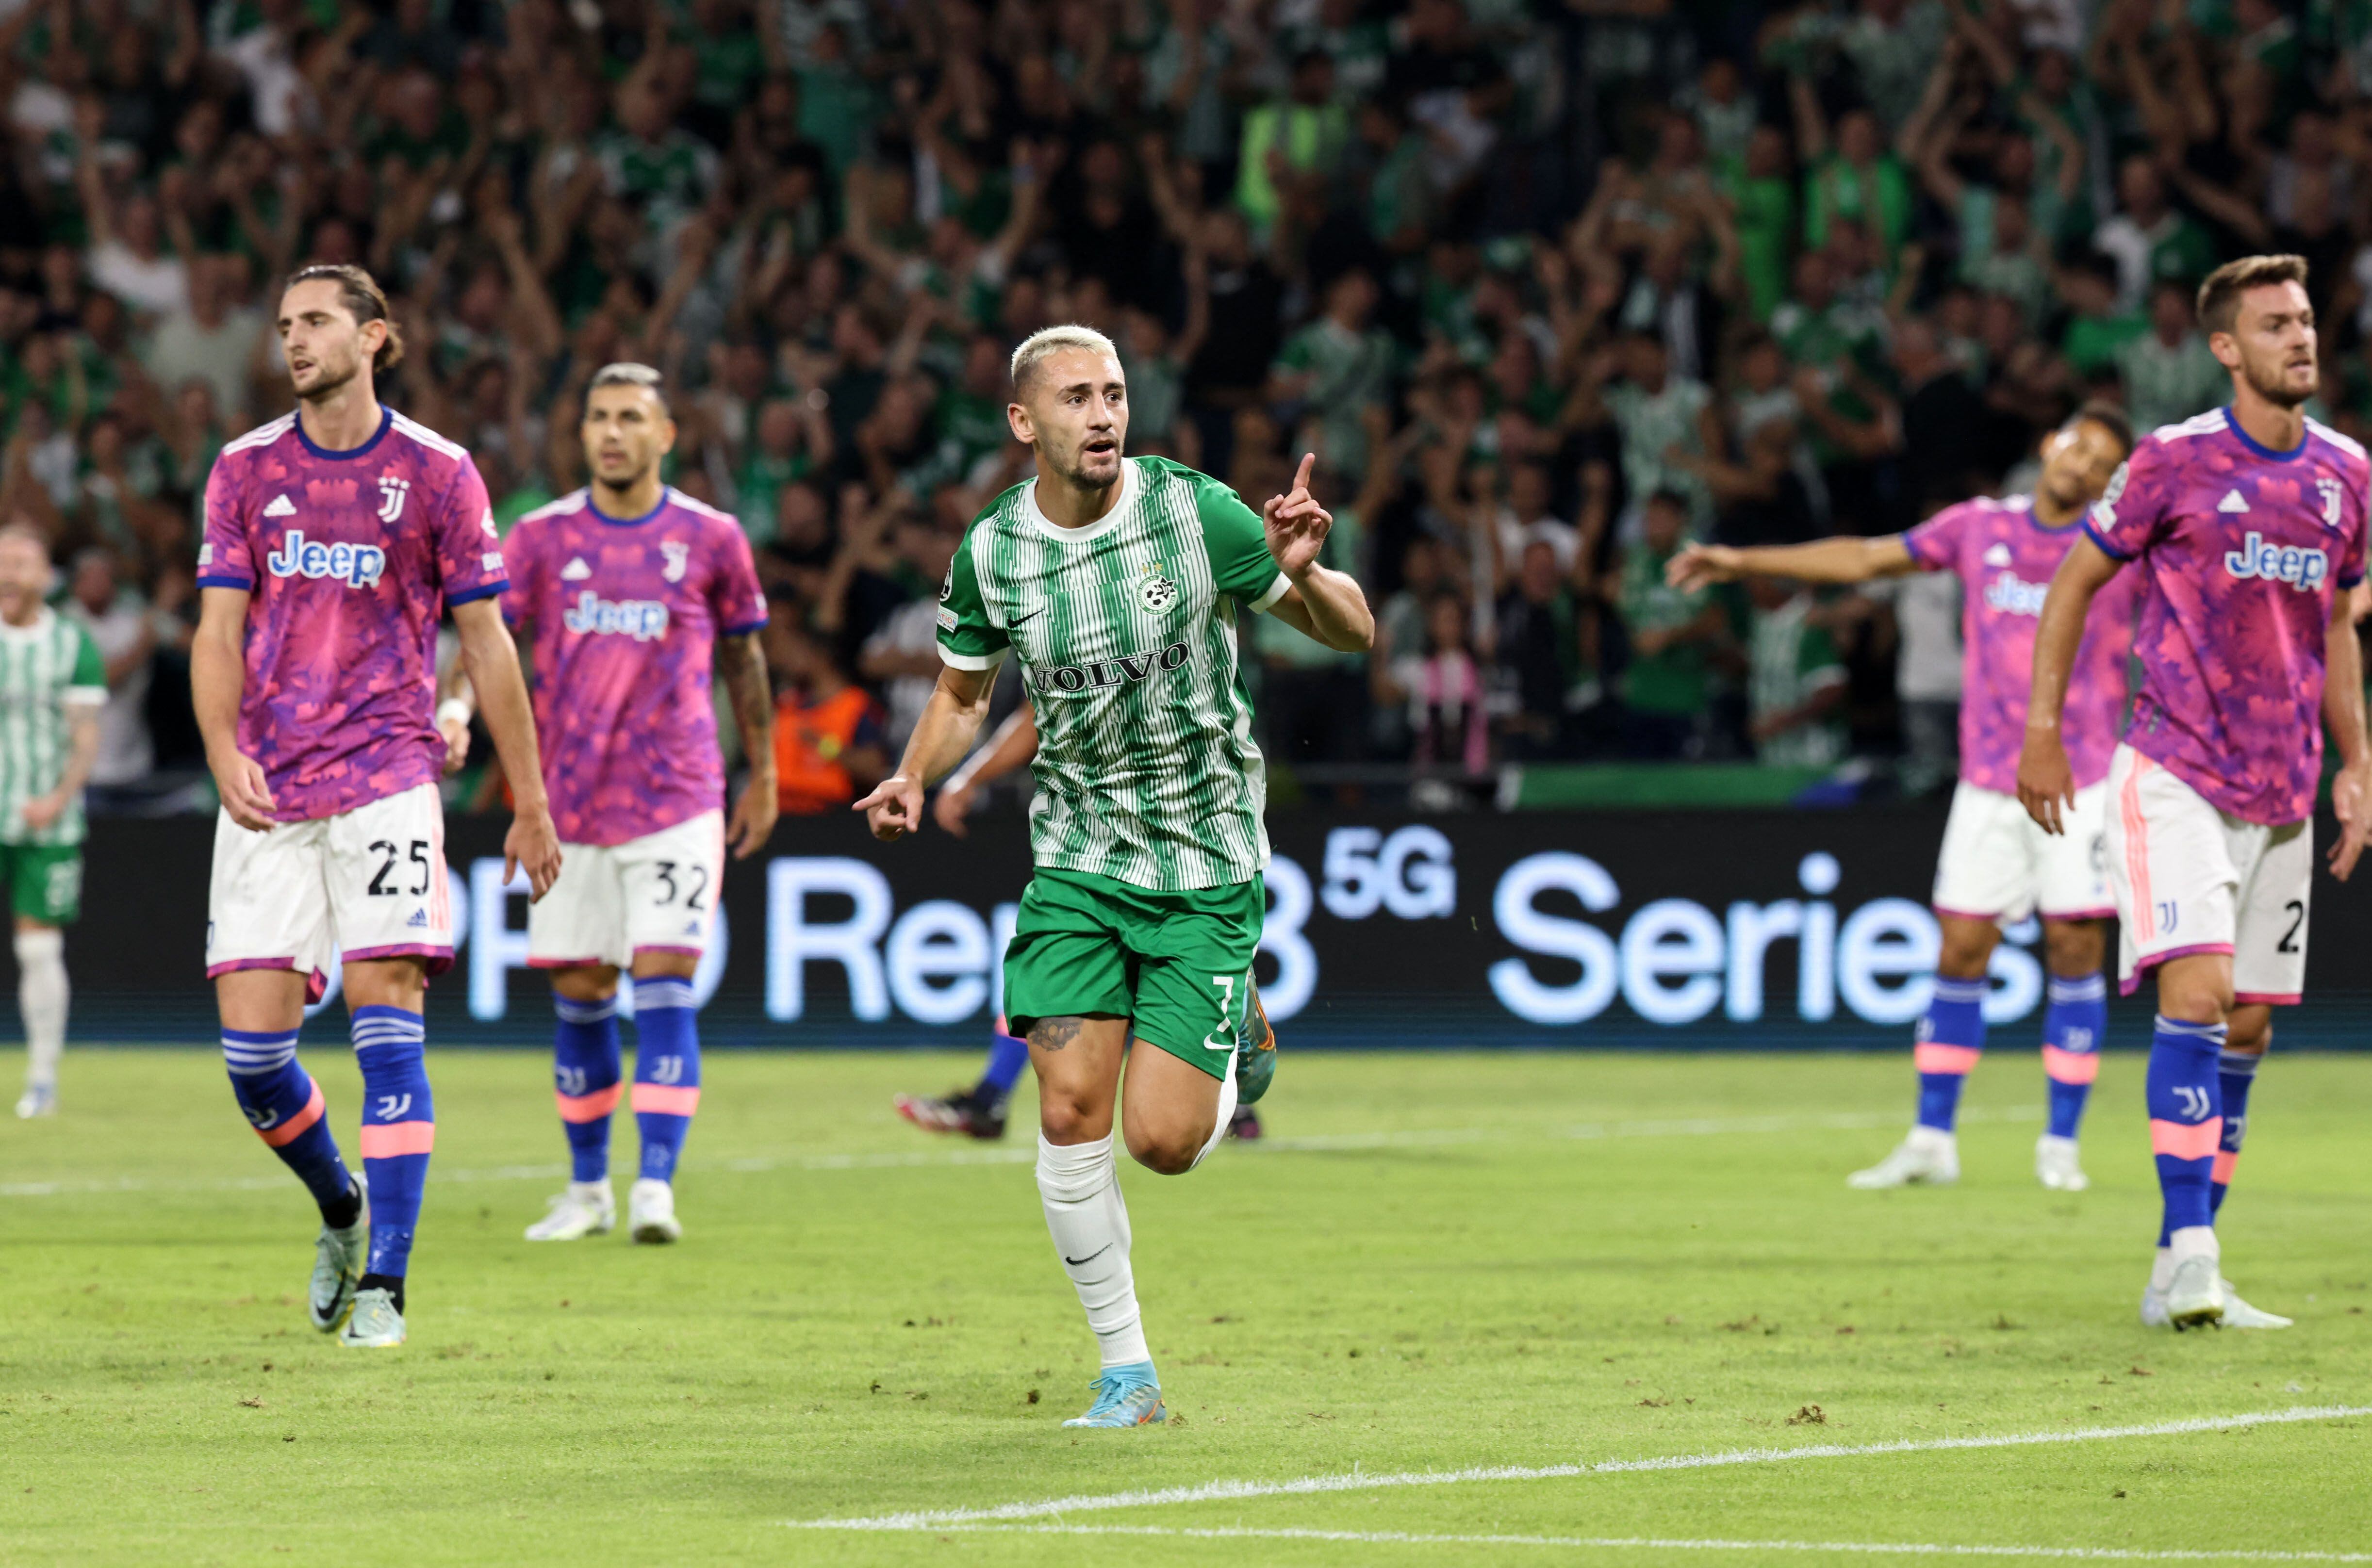 Maccabi Haifa's Israeli midfielder Omer Atzili celebrates his goal during the UEFA Champions League group H football match between Israel's Maccabi Haifa and Italy's Juventus at the Sammy Ofer stadium in the city of Haifa on October 11, 2022. (Photo by RONALDO SCHEMIDT / AFP)